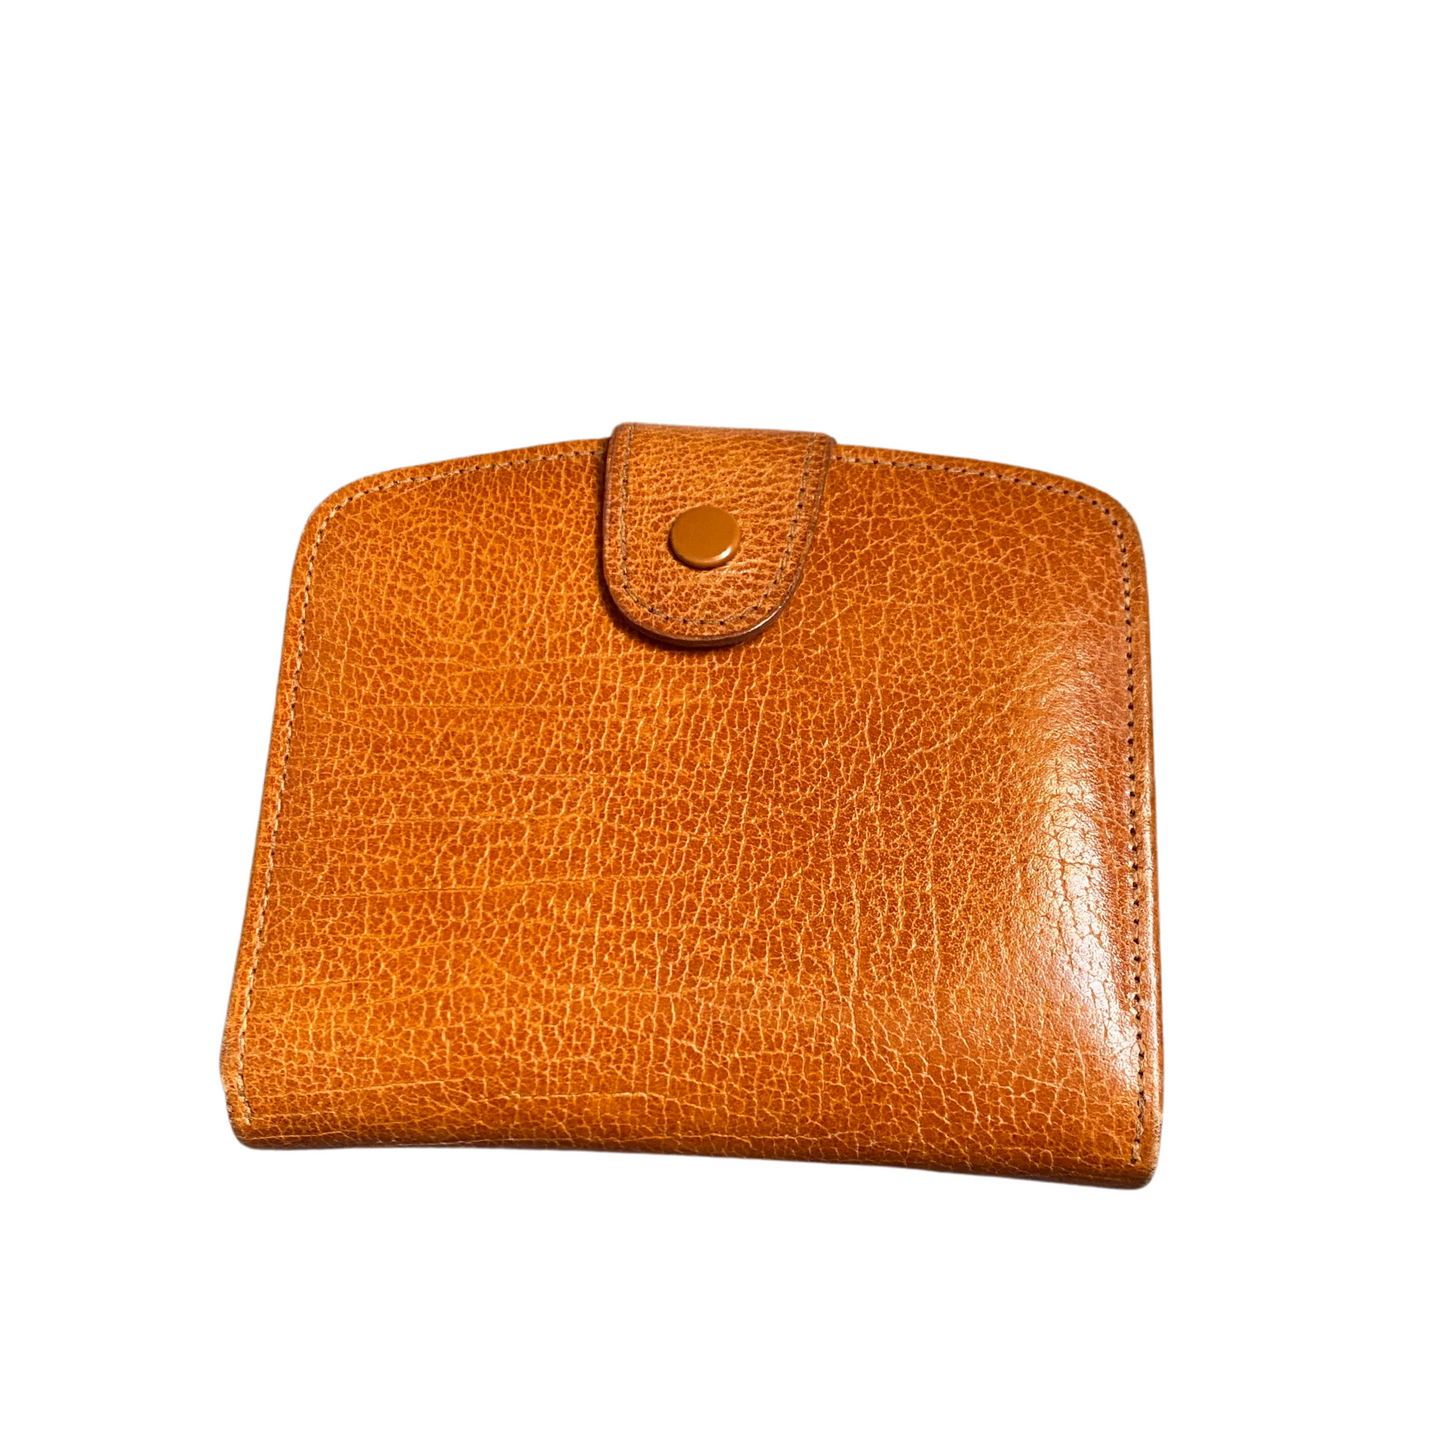 Tan leather clasp top coin purse with additional compartments for notes and cards